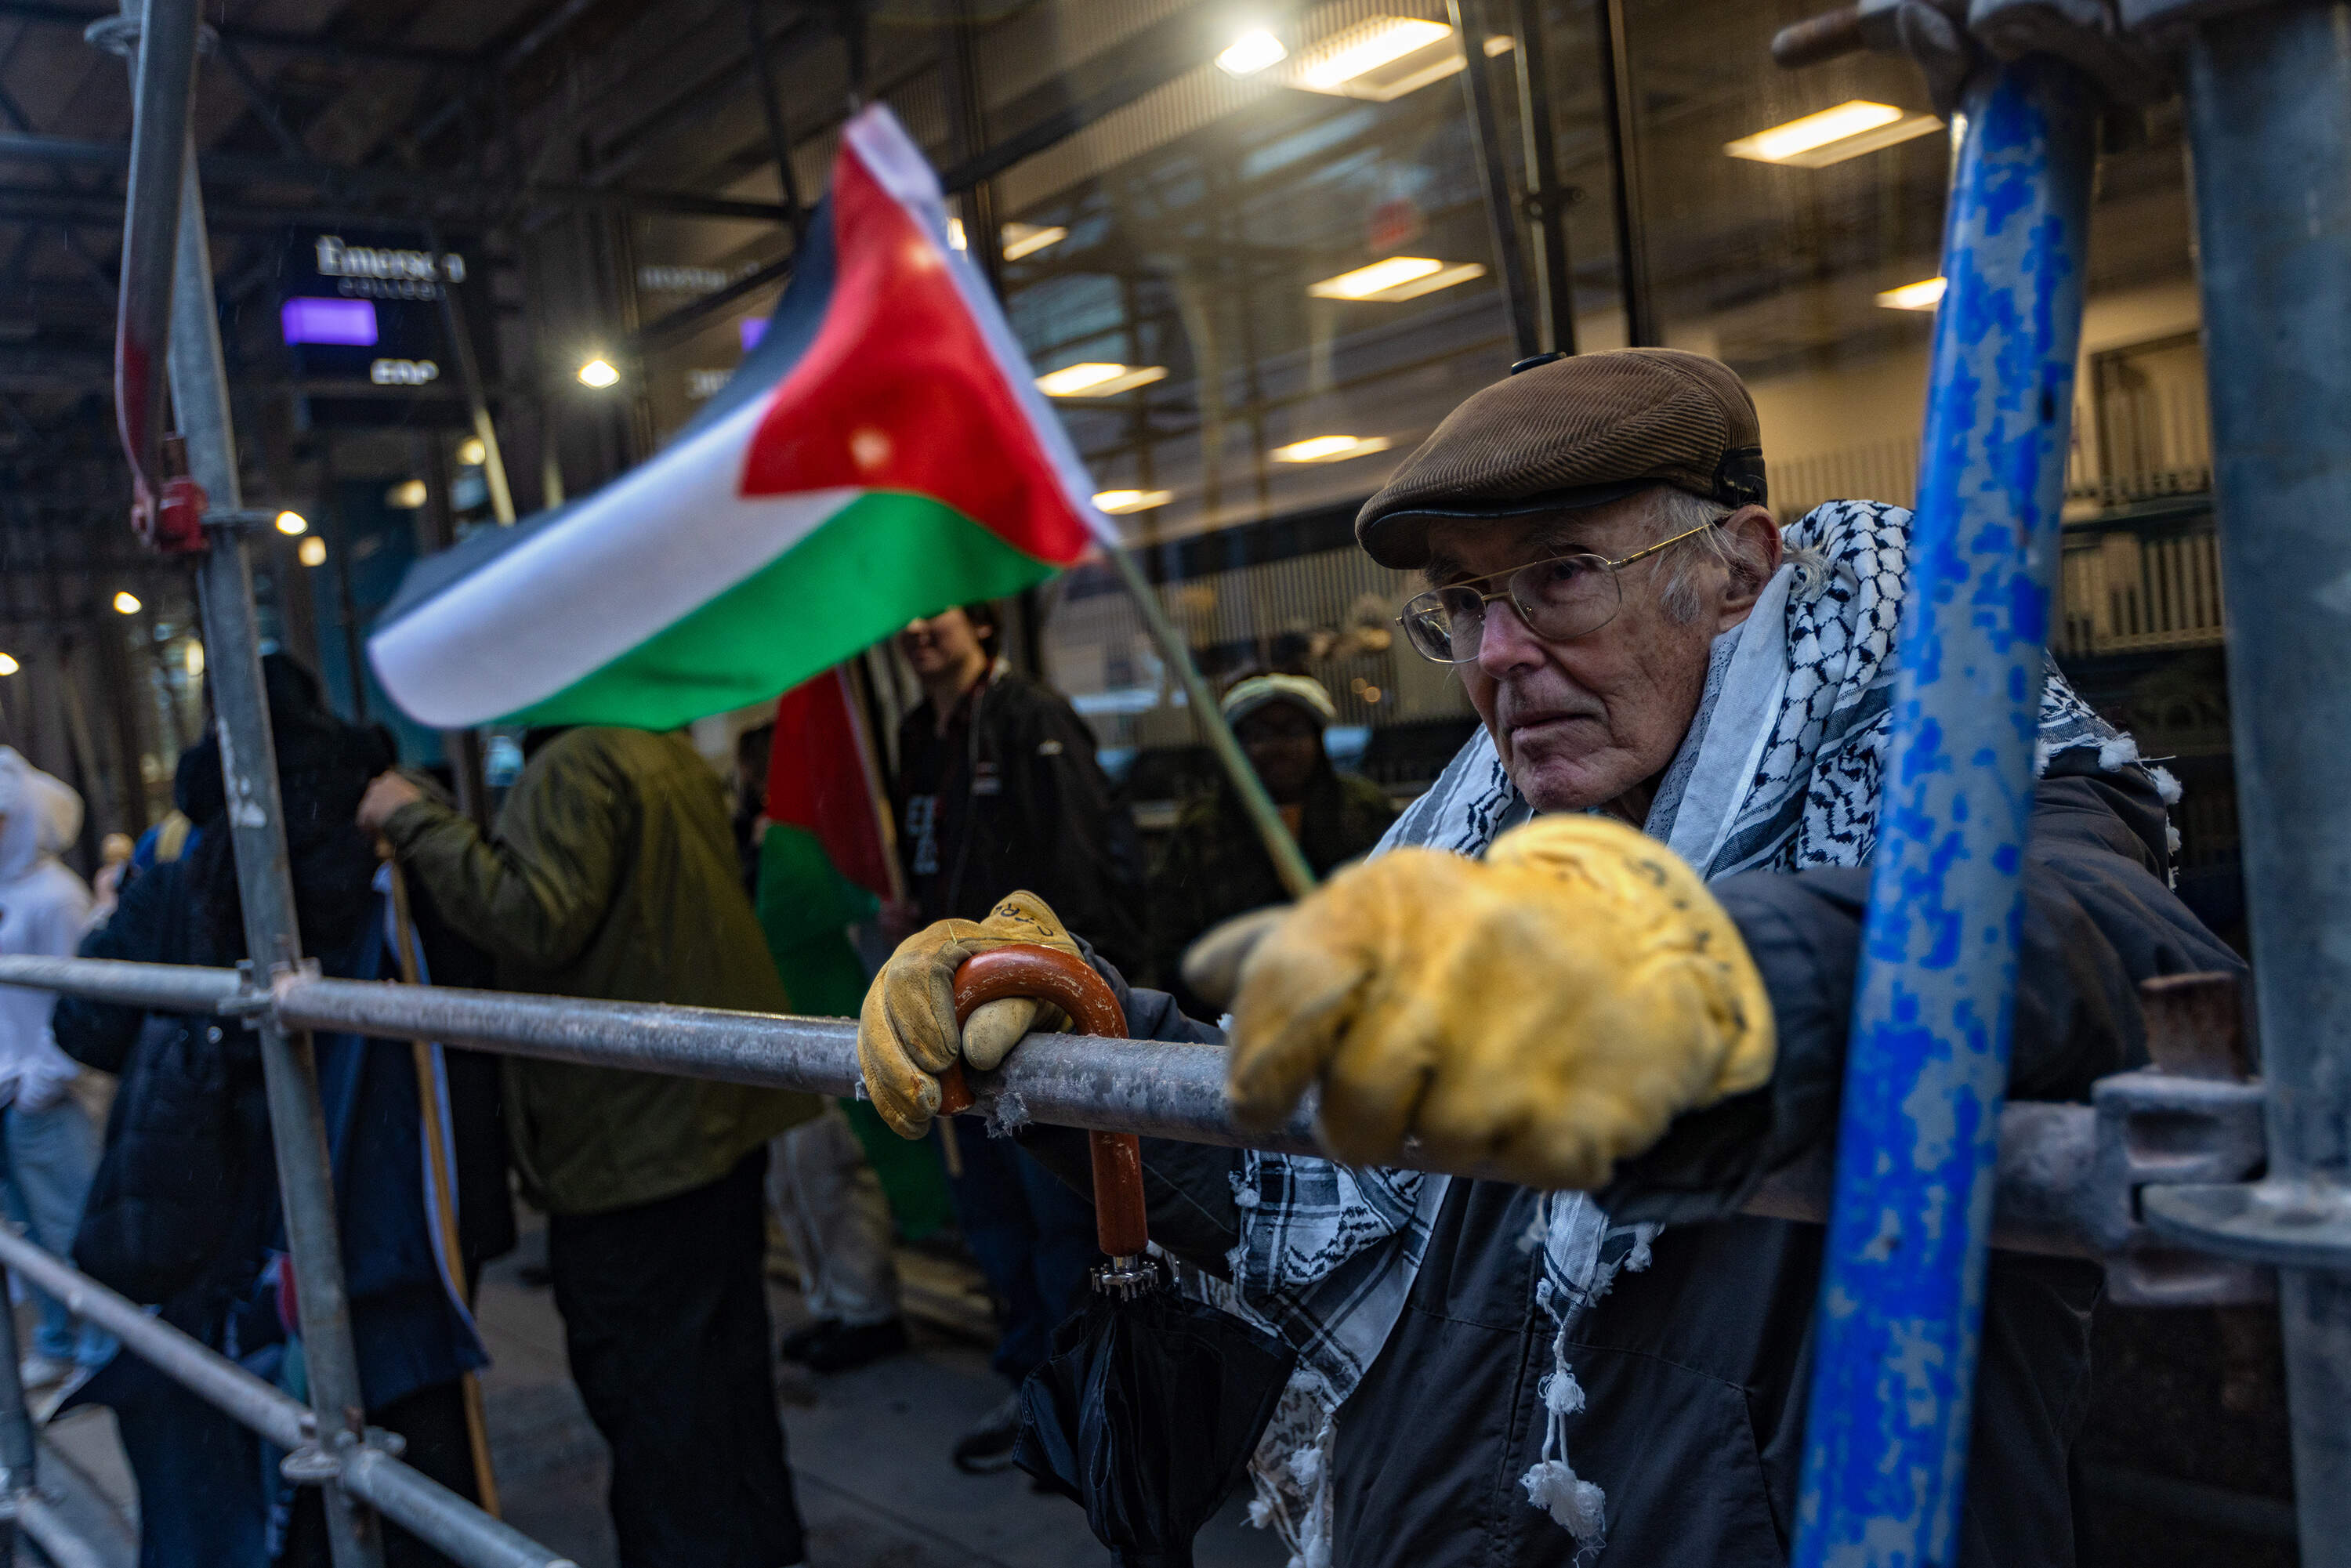 A man holding a Palestinian flag stands with other protesters across the street from the Ritz Carlton Hotel where Vice President Kamala Harris is staying in Boston. (Jesse Costa/WBUR)